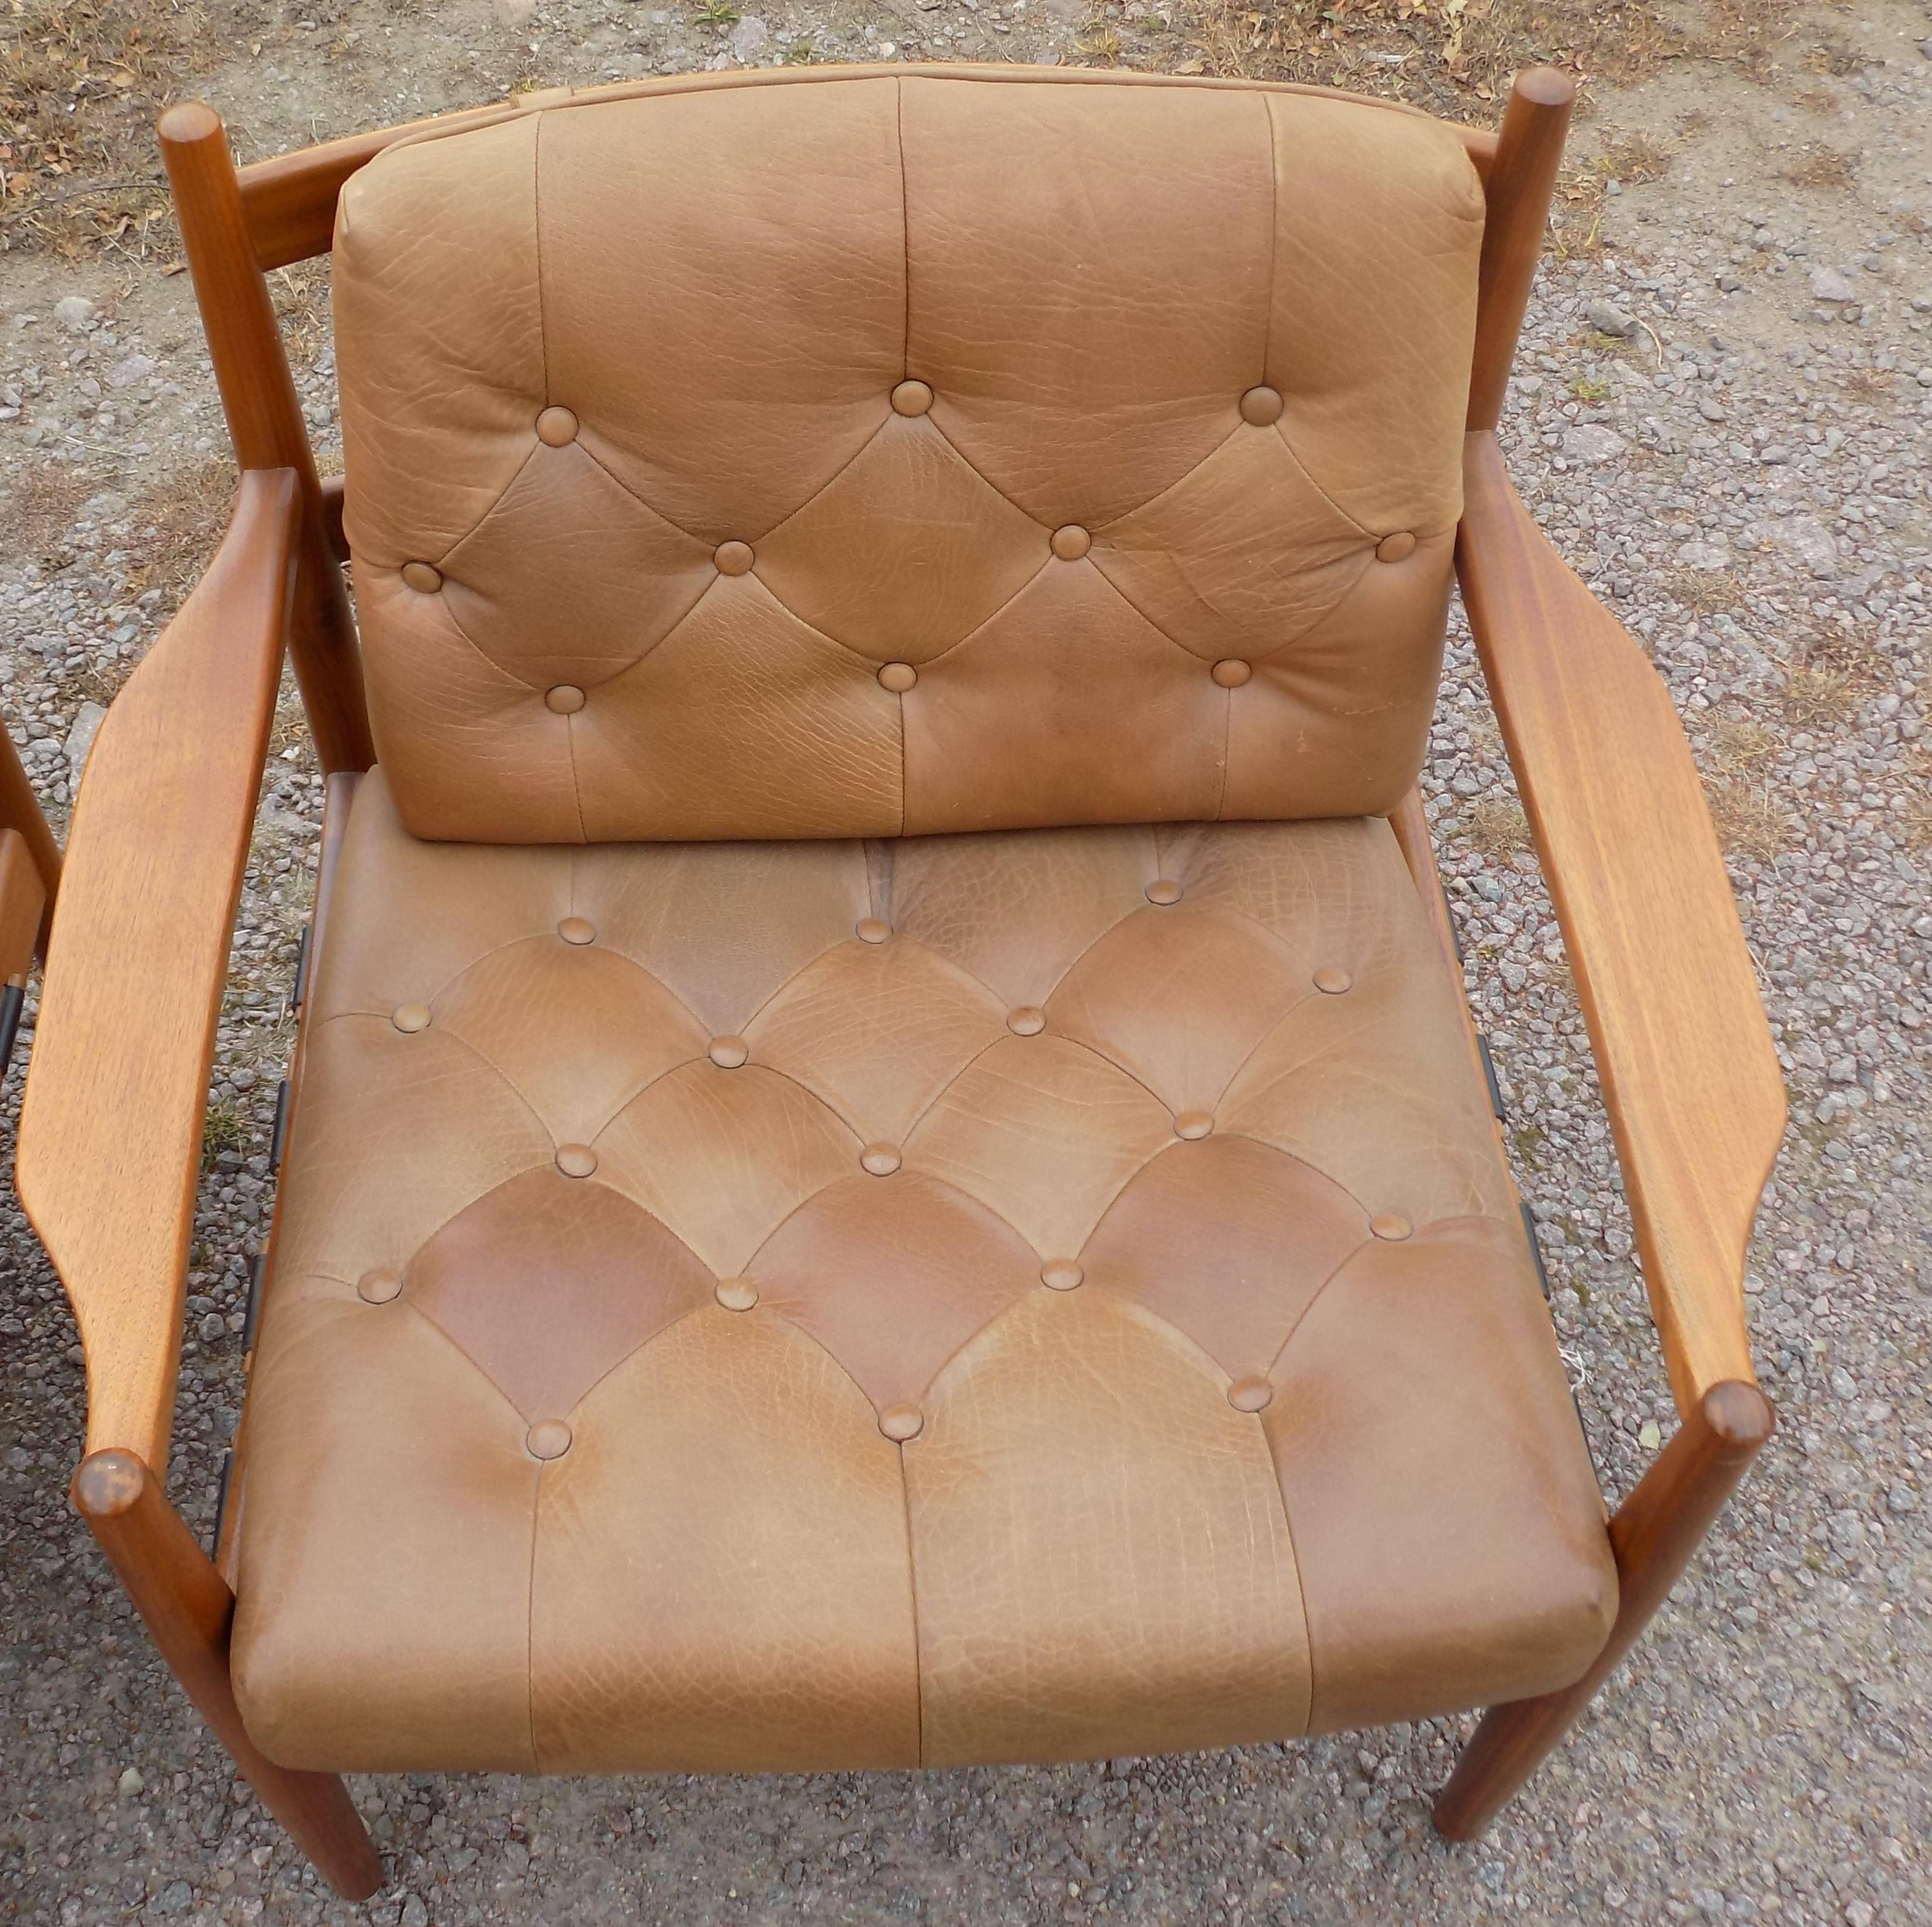 A pair of Midcentury armchairs "Lacko" by Ingemar Thillmark for OPE Mobler Jonkoping Sweden. Original buffalo leather in great condition. Please contact us for more pictures or questions about international freight.